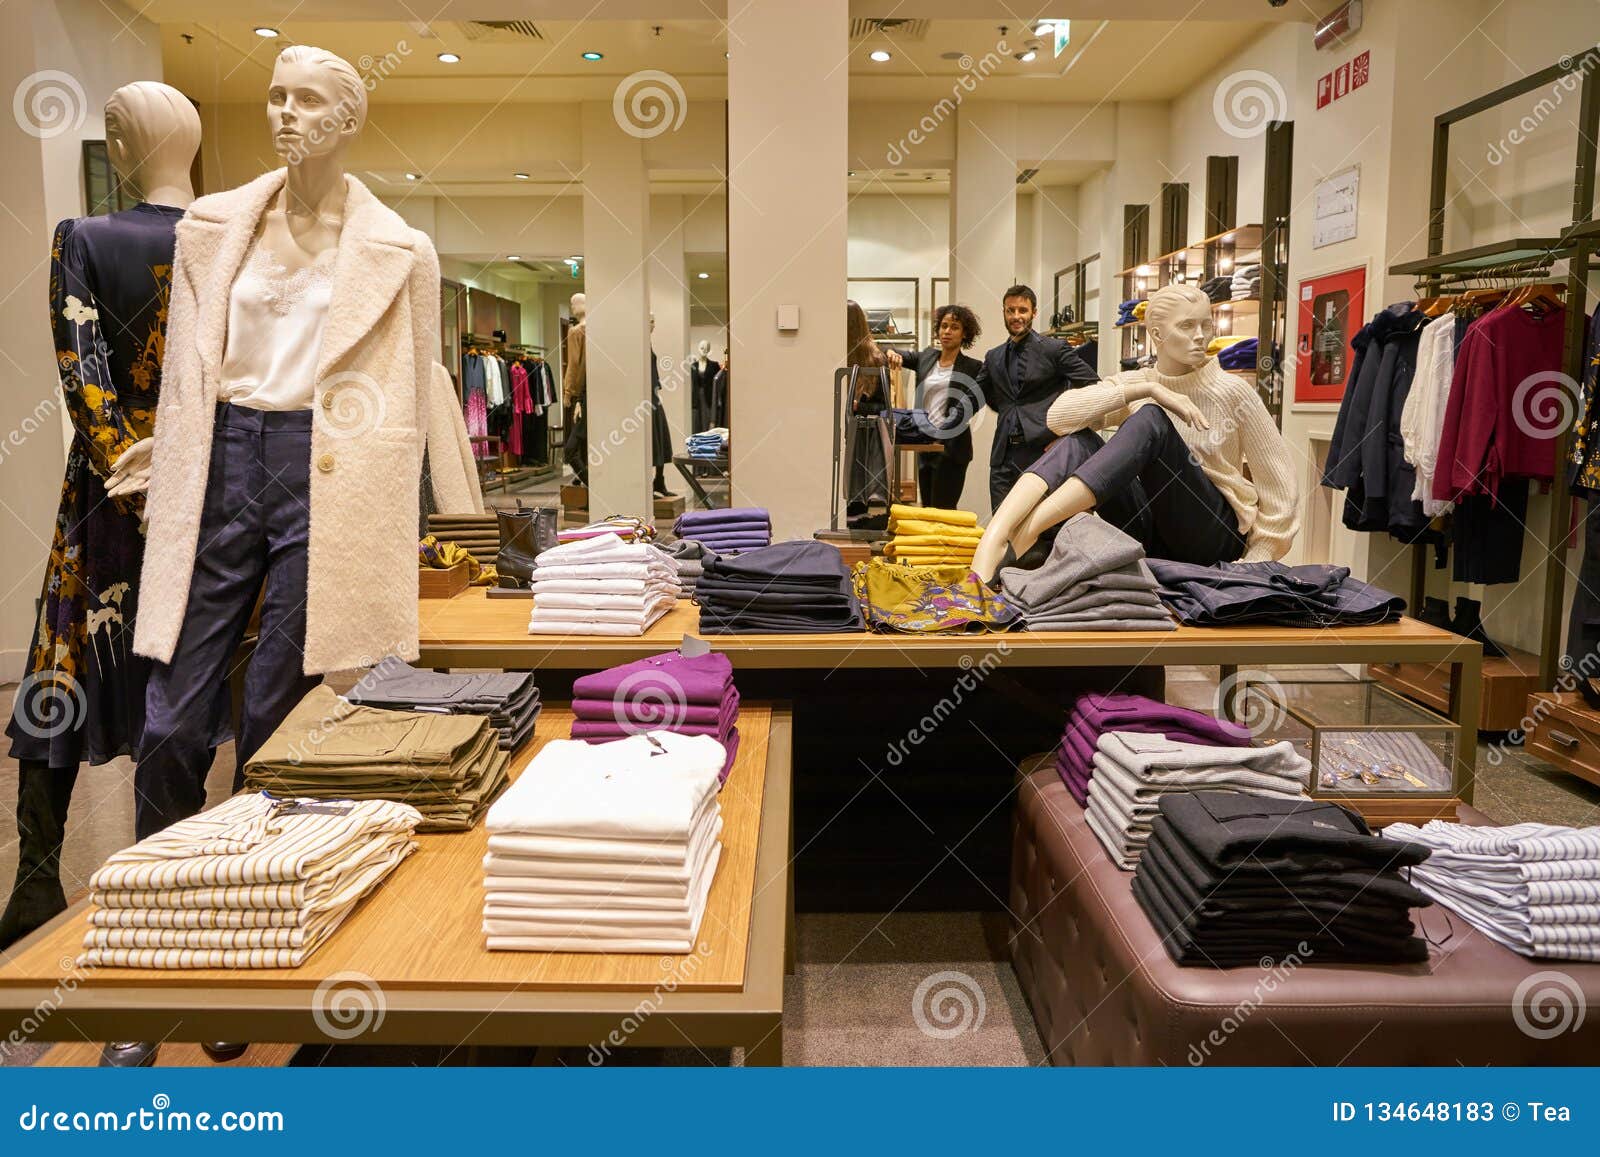 Clothing retail store editorial stock photo. Image of garment - 134648183